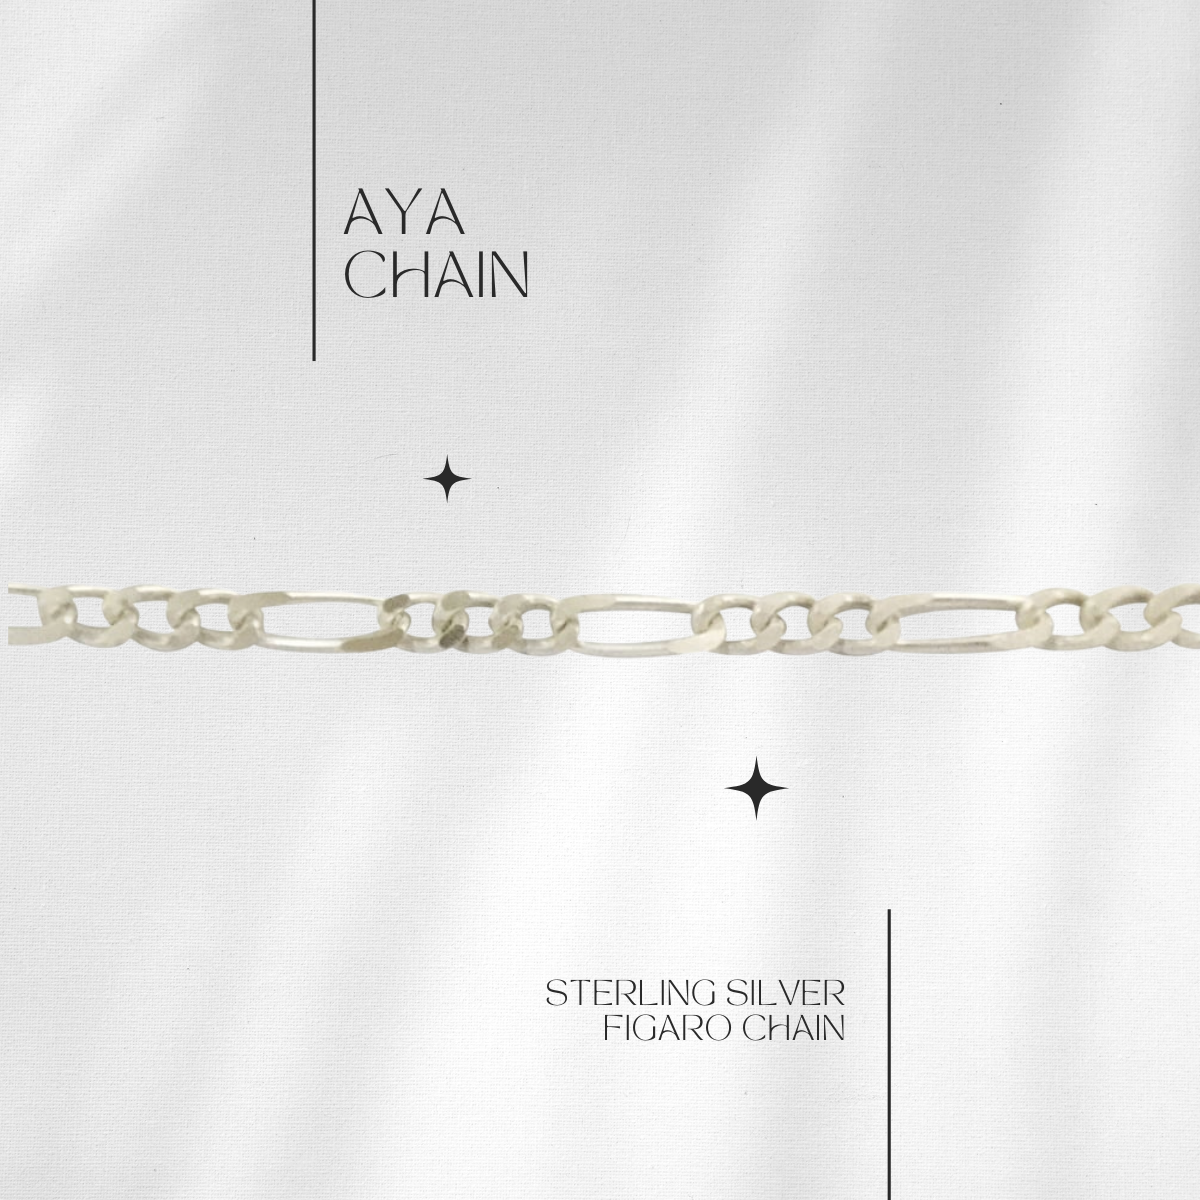 Aya Figaro Chain in Sterling // RESERVATION  for IN-PERSON Permanent Jewelry